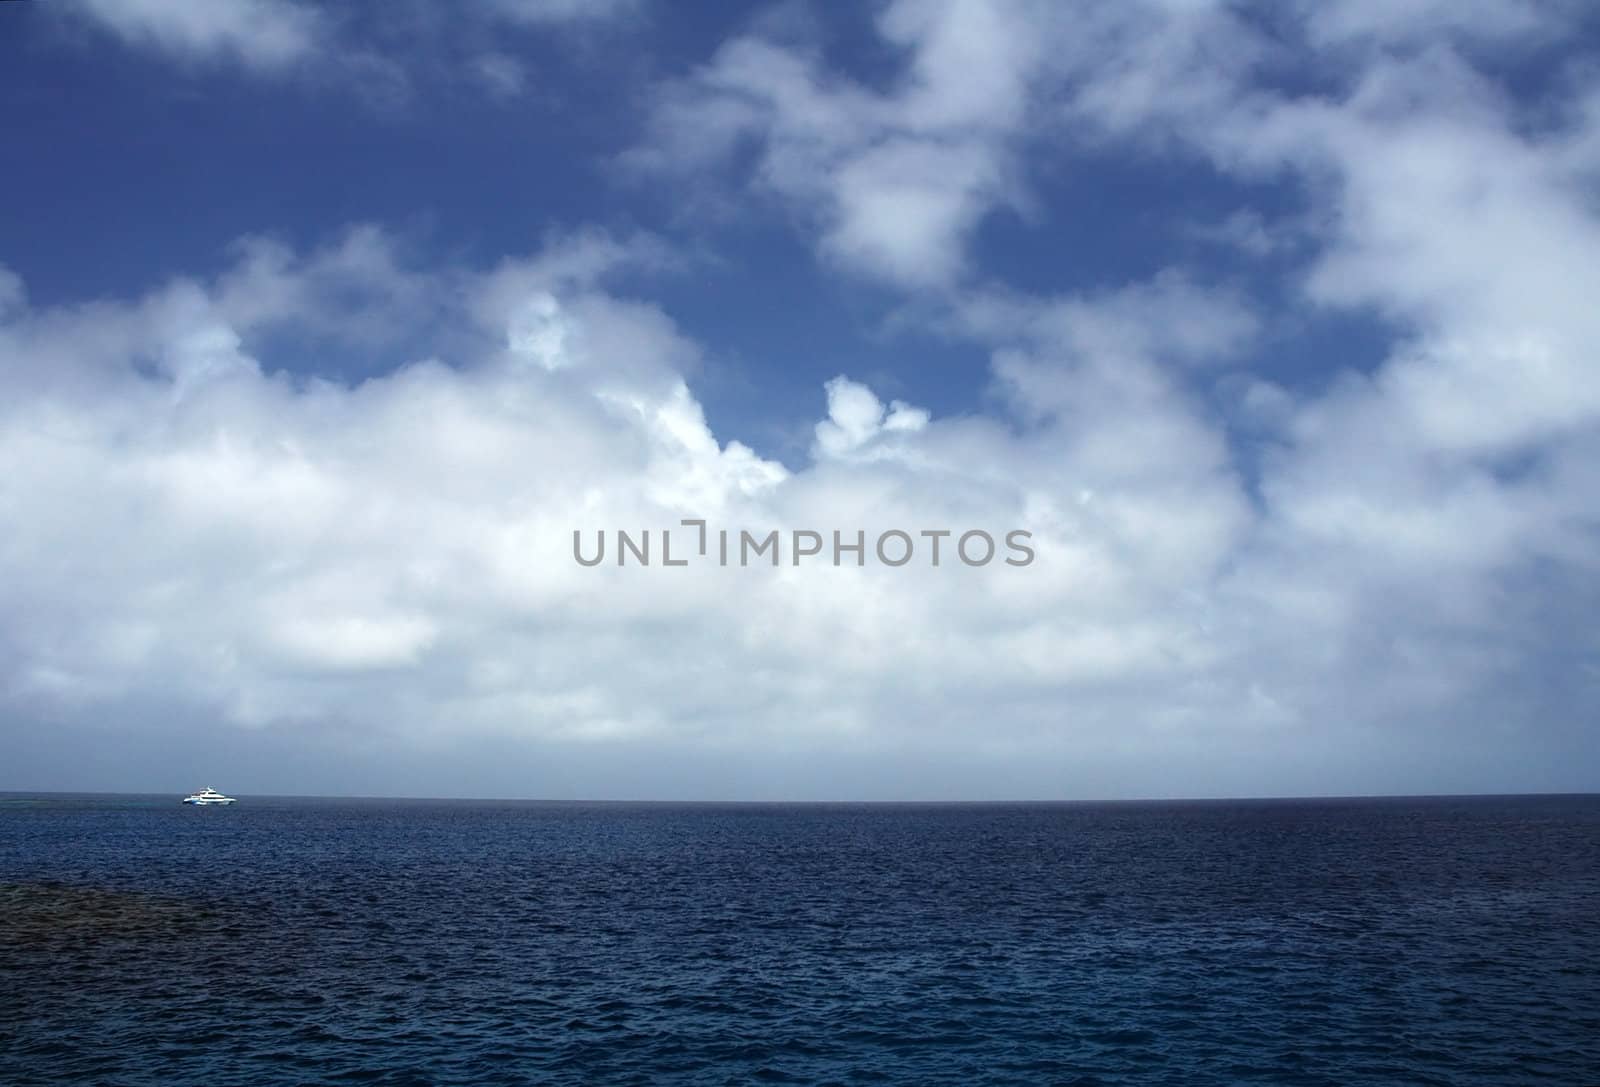 ocean scenery, blue sky with clouds, white boat in distance, location: Great Barrier Reef, near Cairns